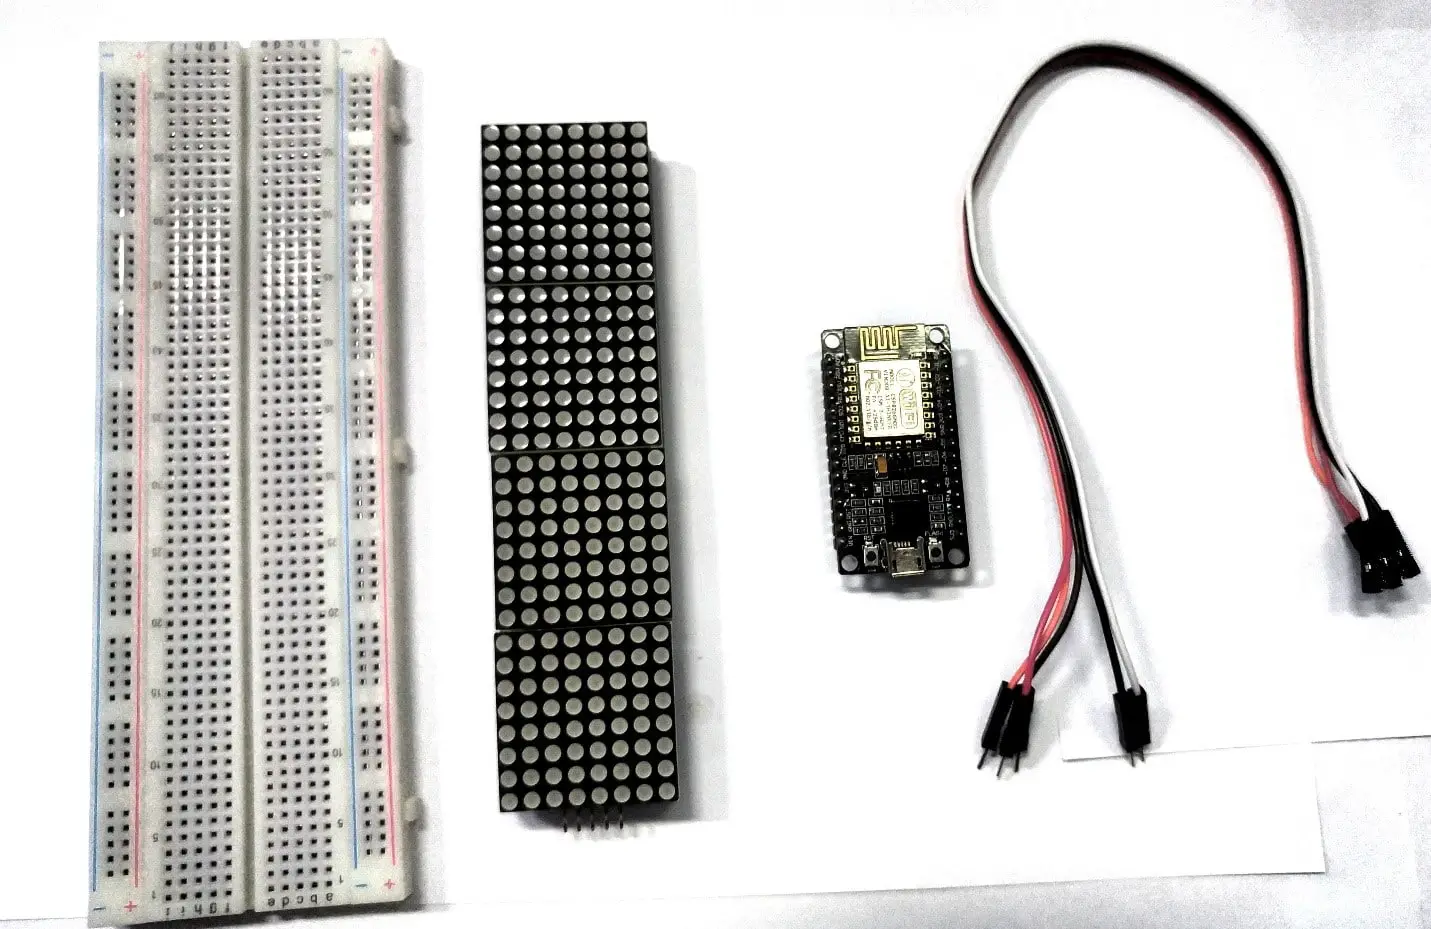 Build Display message system with WI-FI micro controller